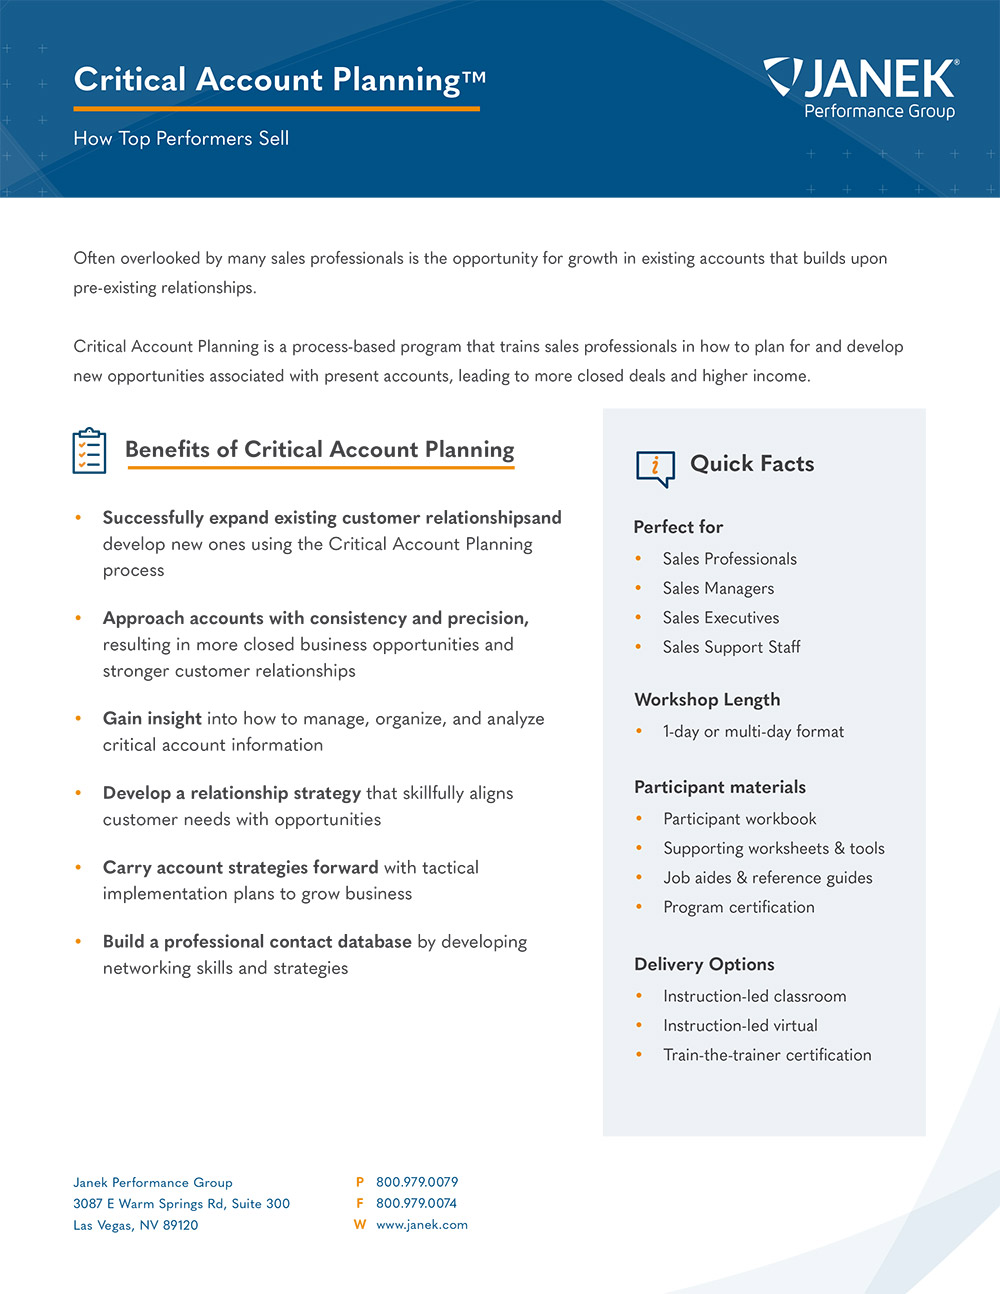 Download the Critical Account Planning Brochure